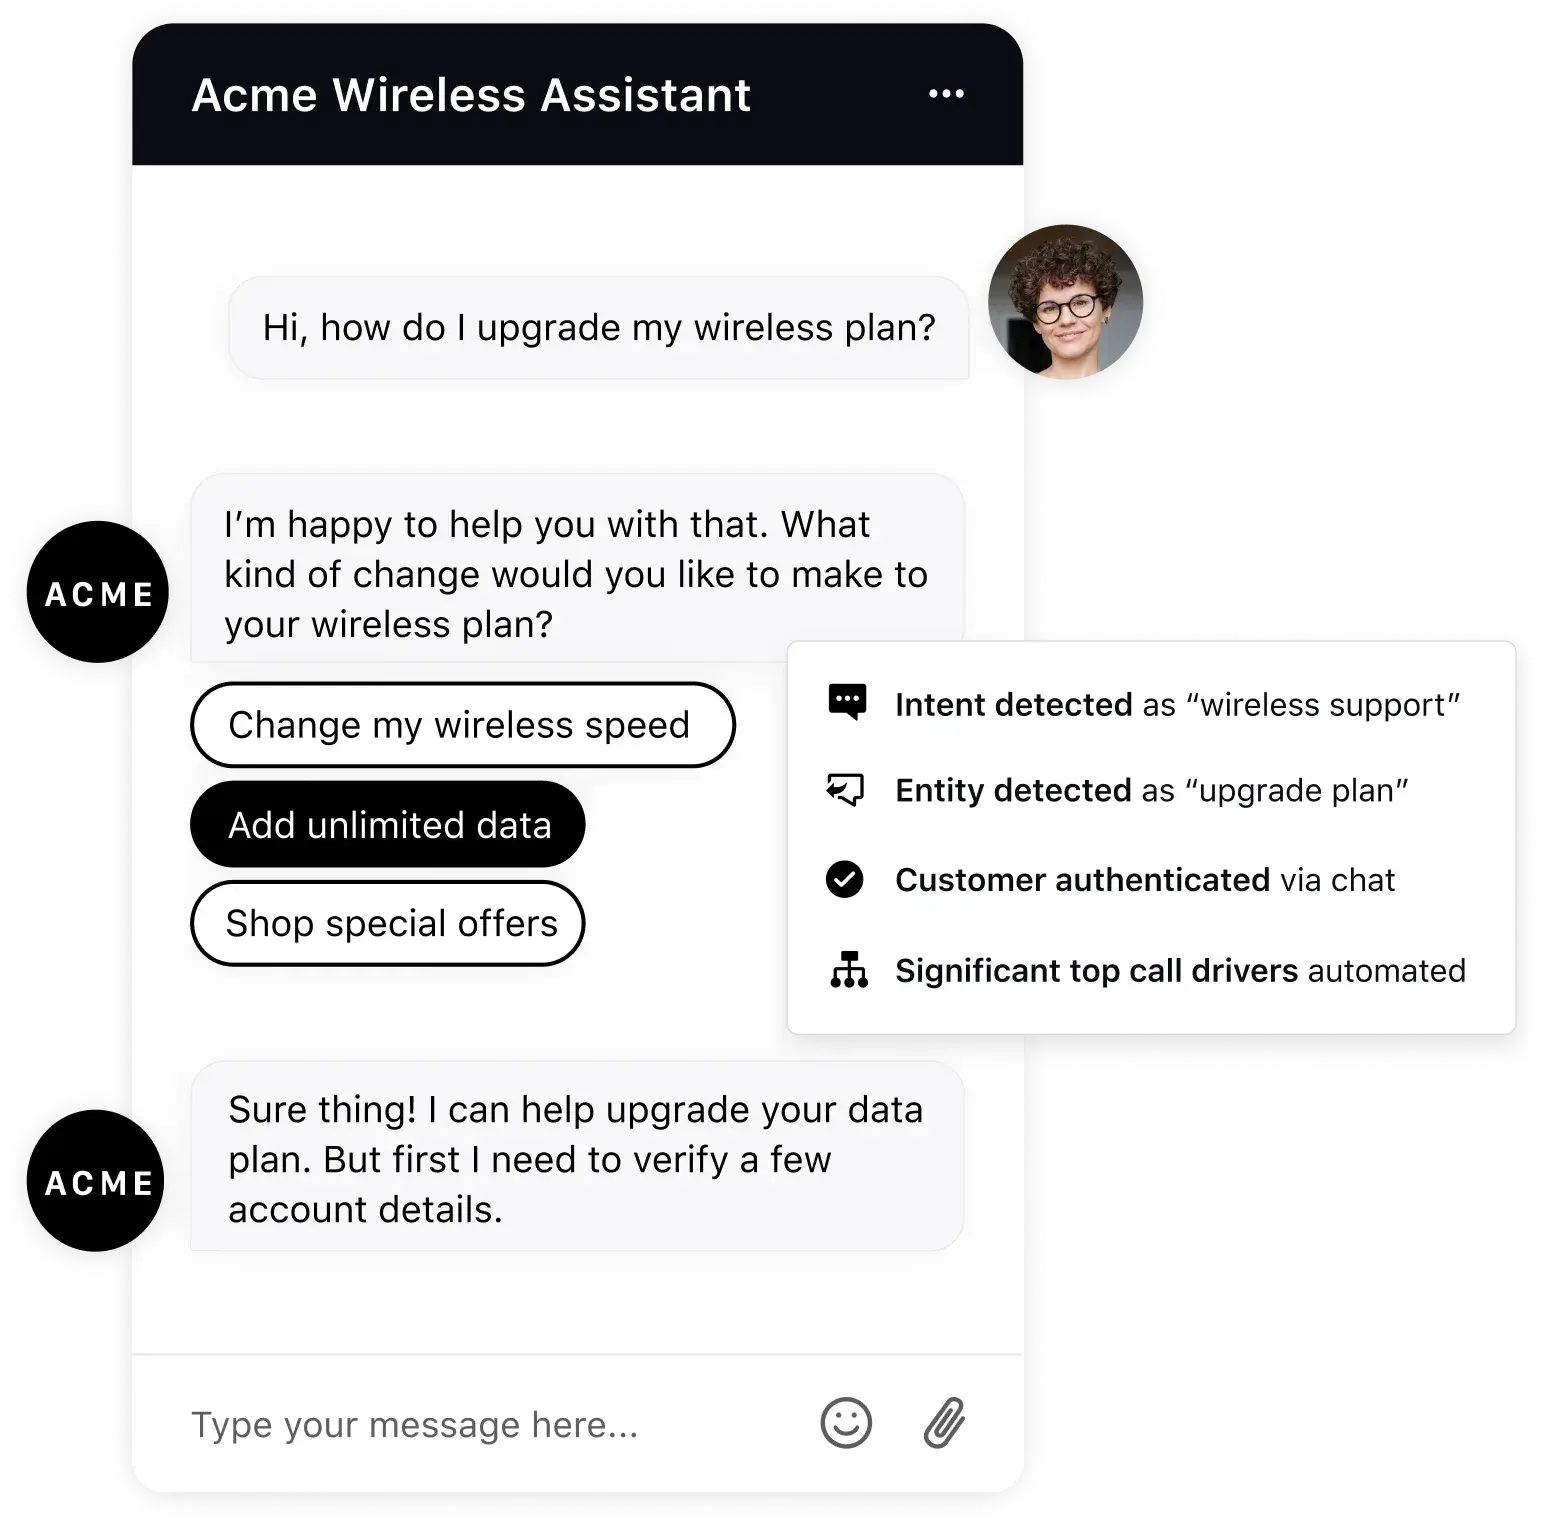 Sprinklr’s Conversational AI engages user in a conversation through chatbots